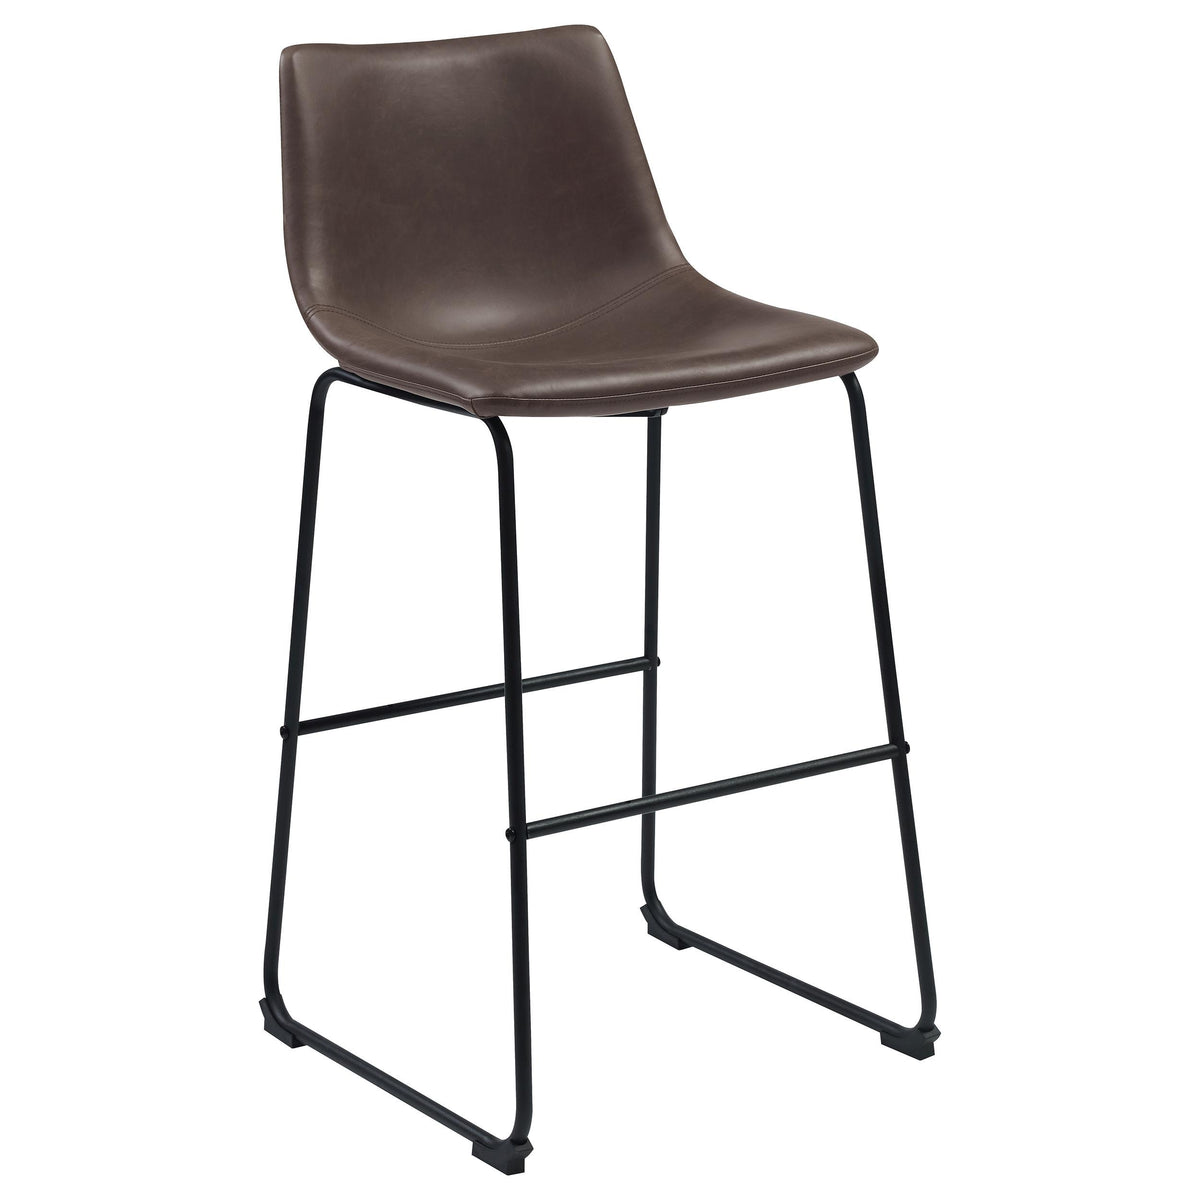 Michelle Armless Bar Stools Two-tone Brown and Black (Set of 2) Michelle Armless Bar Stools Two-tone Brown and Black (Set of 2) Half Price Furniture